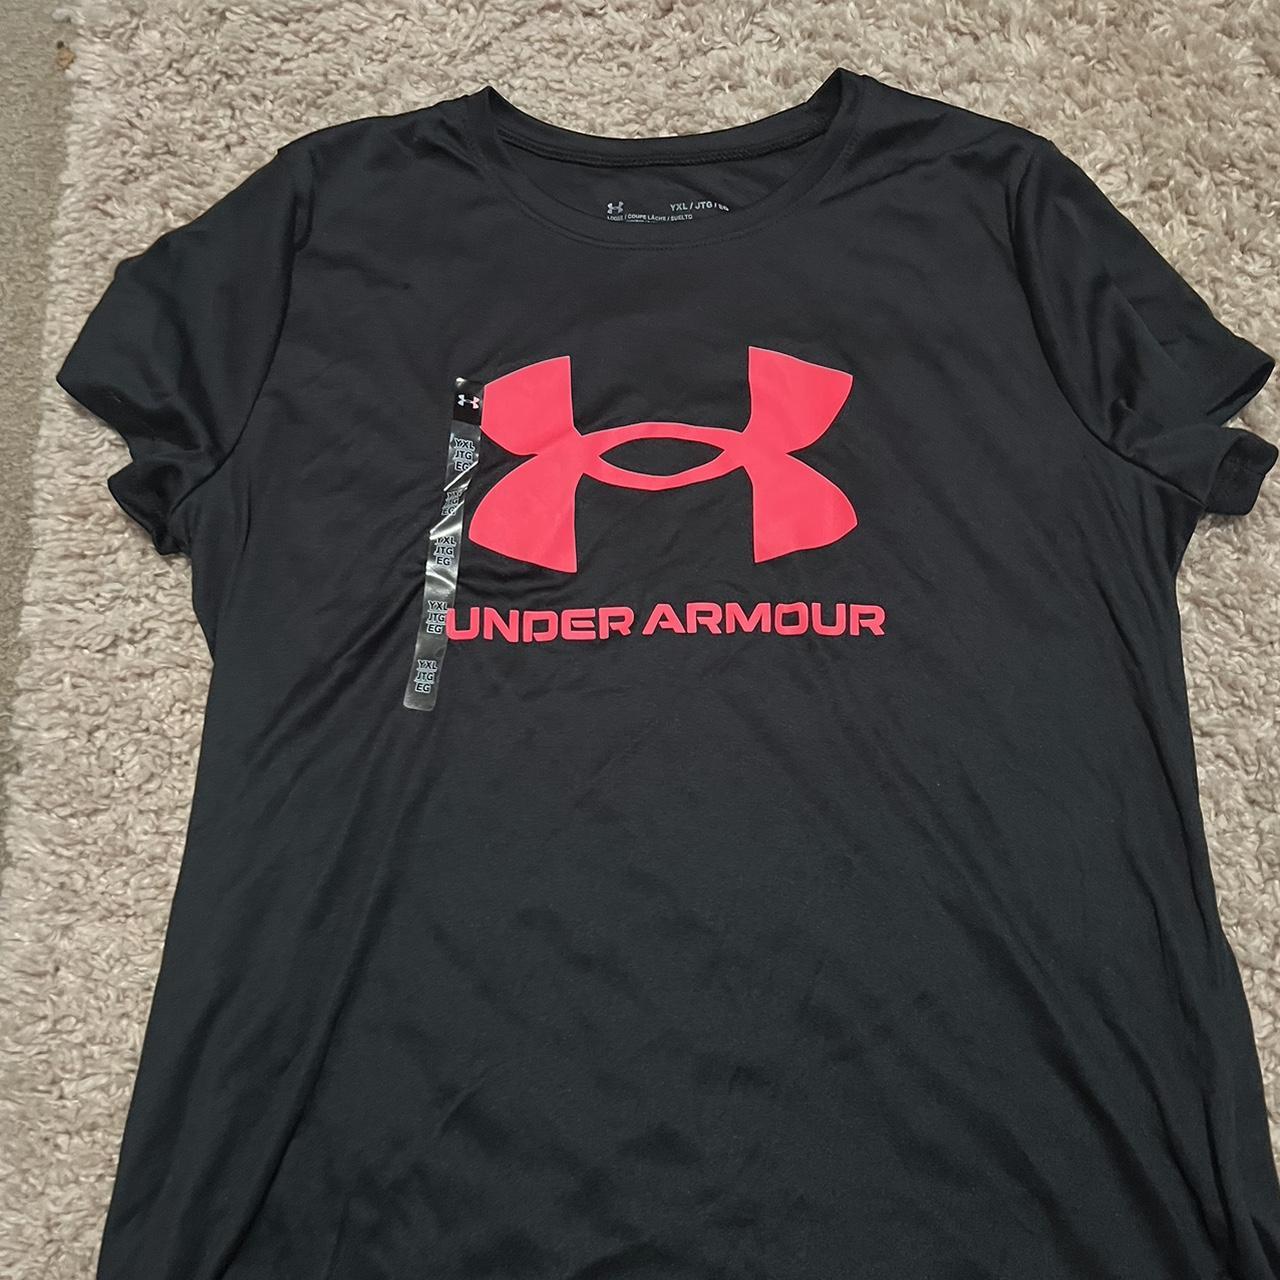 Under Armour Tshirt, says youth XL but could fit an - Depop